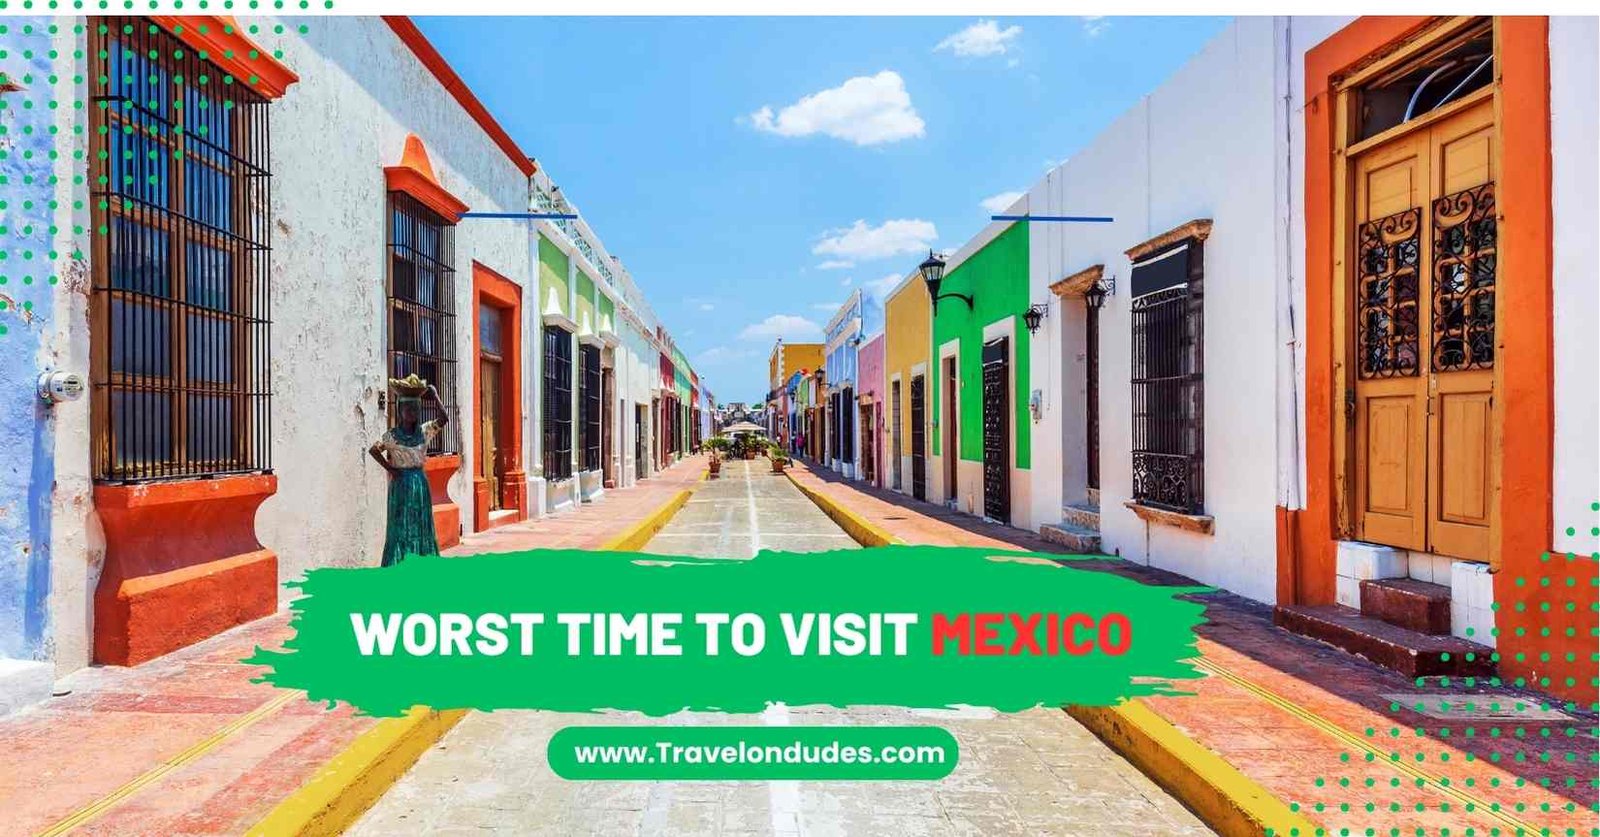 What Is The Worst Time To Visit Mexico? Travel On Dudes